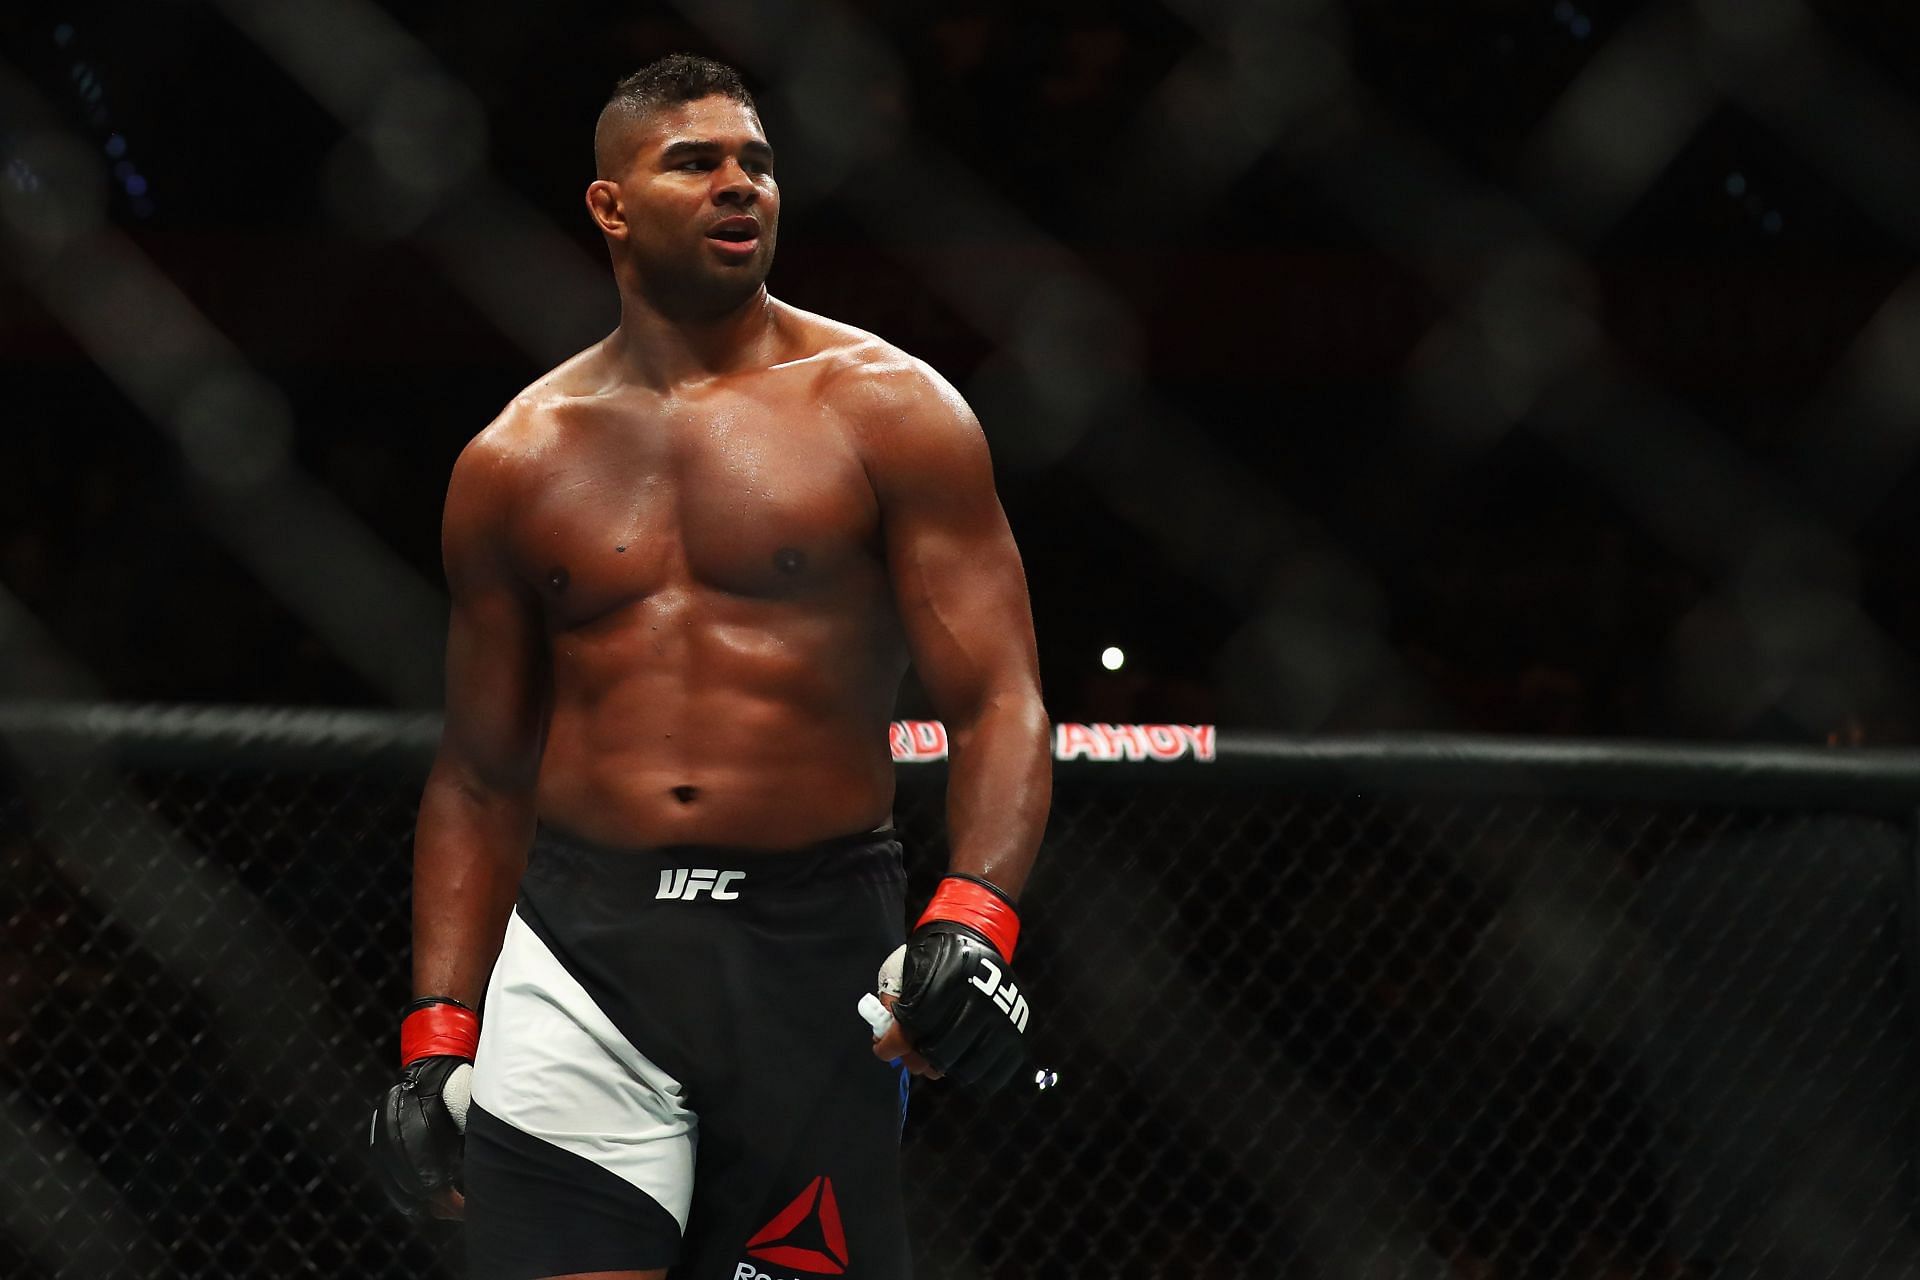 A heavyweight title bout between Cain Velasquez and Alistair Overeem could&#039;ve been a classic